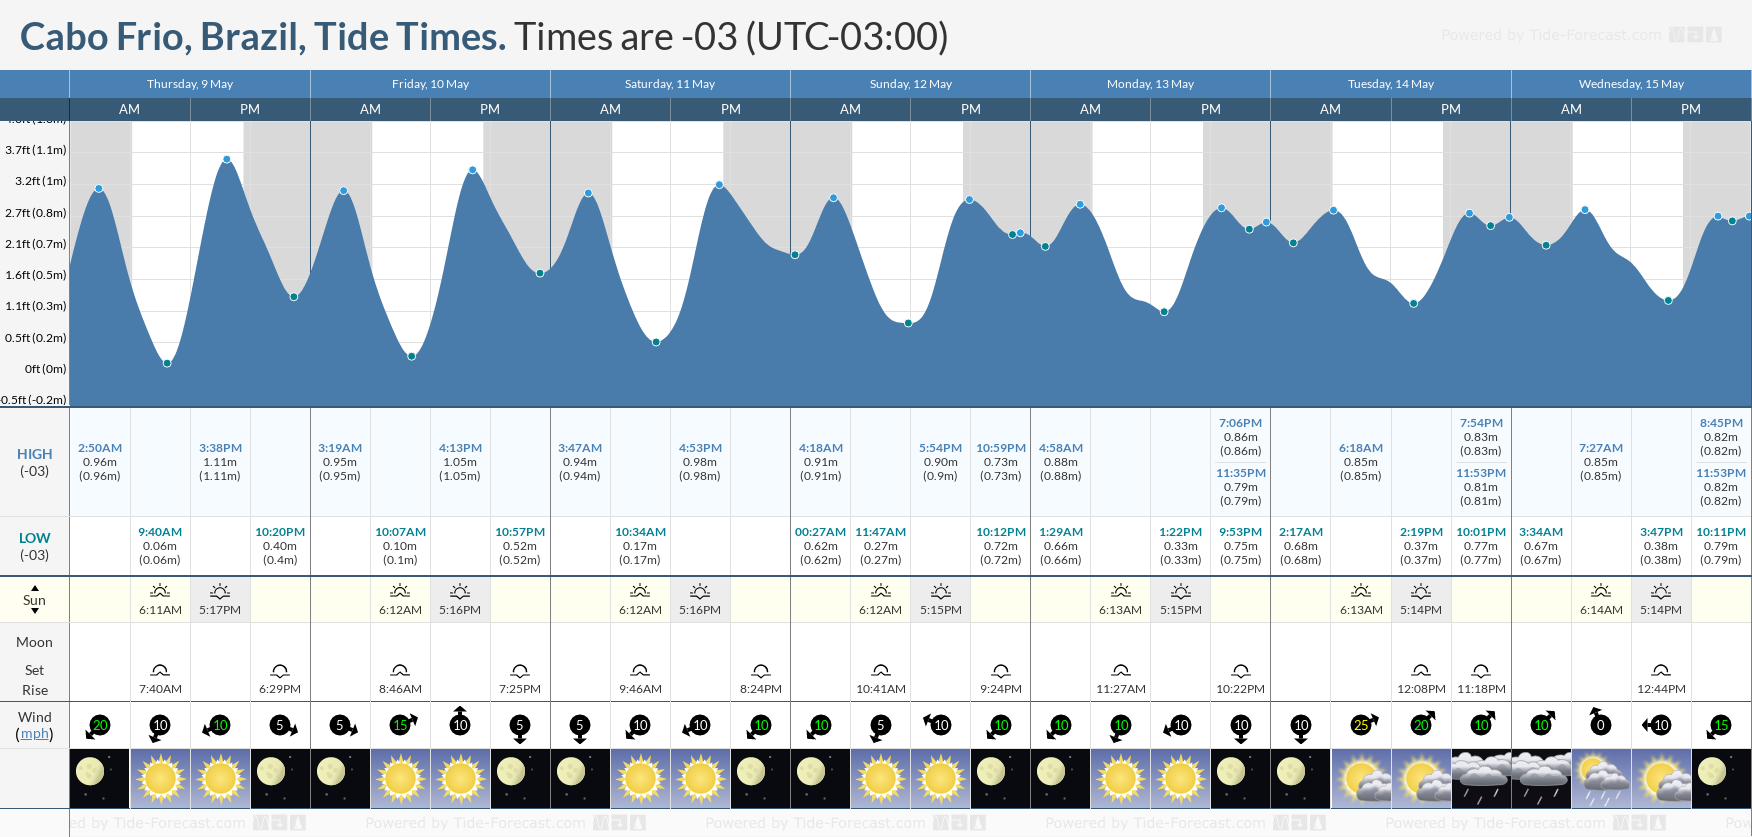 Cabo Frio, Brazil Tide Chart including high and low tide times for the next 7 days